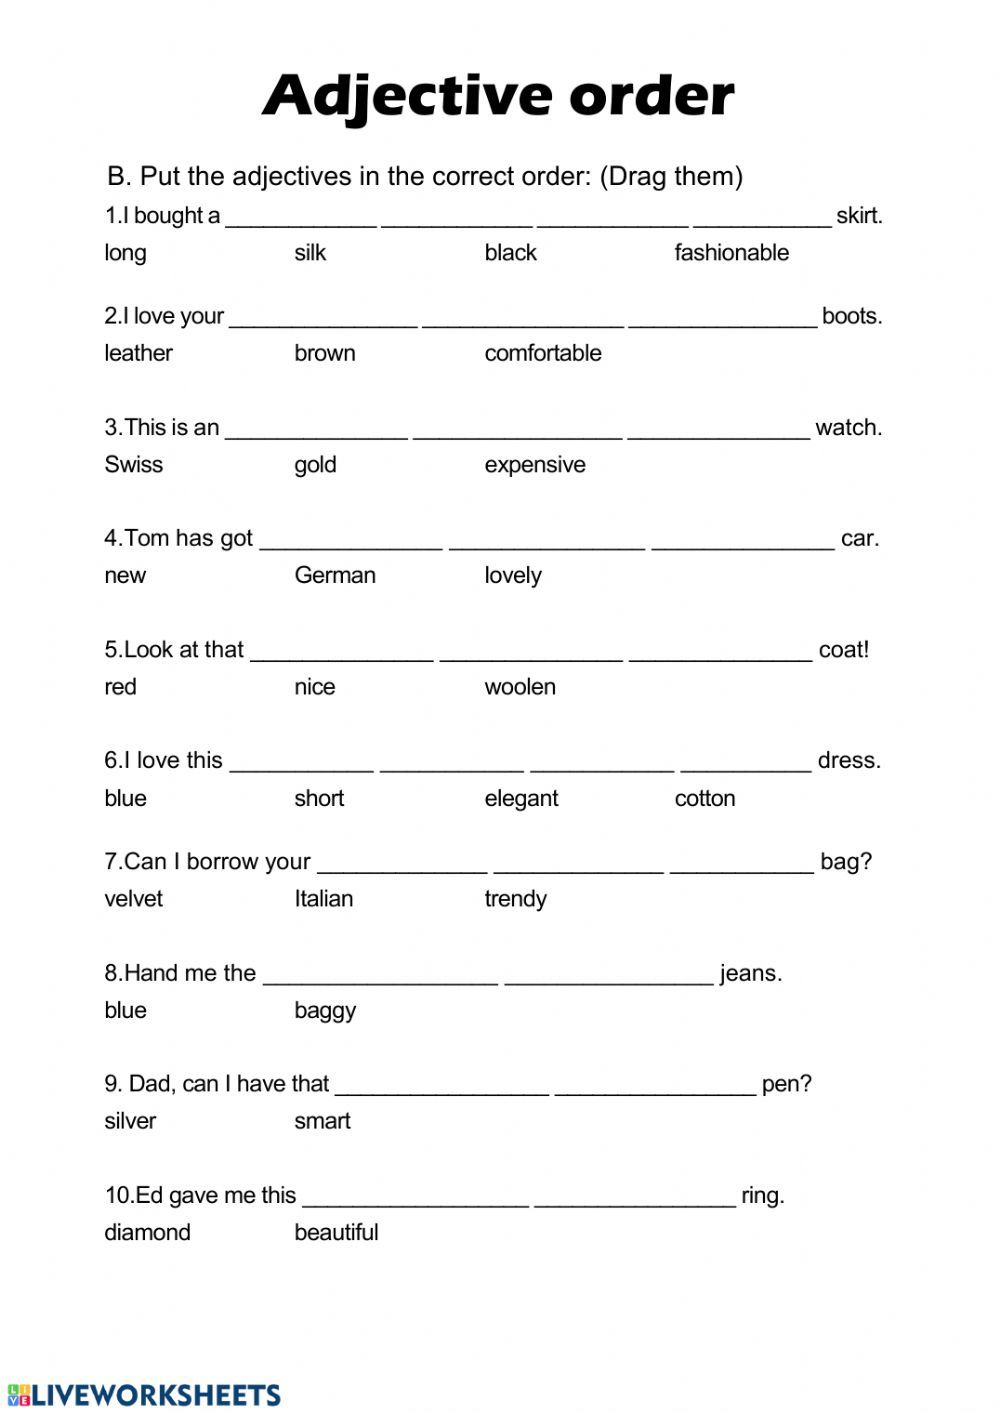 Order Of Adjectives Interactive And Downloadable Worksheet You Can Do